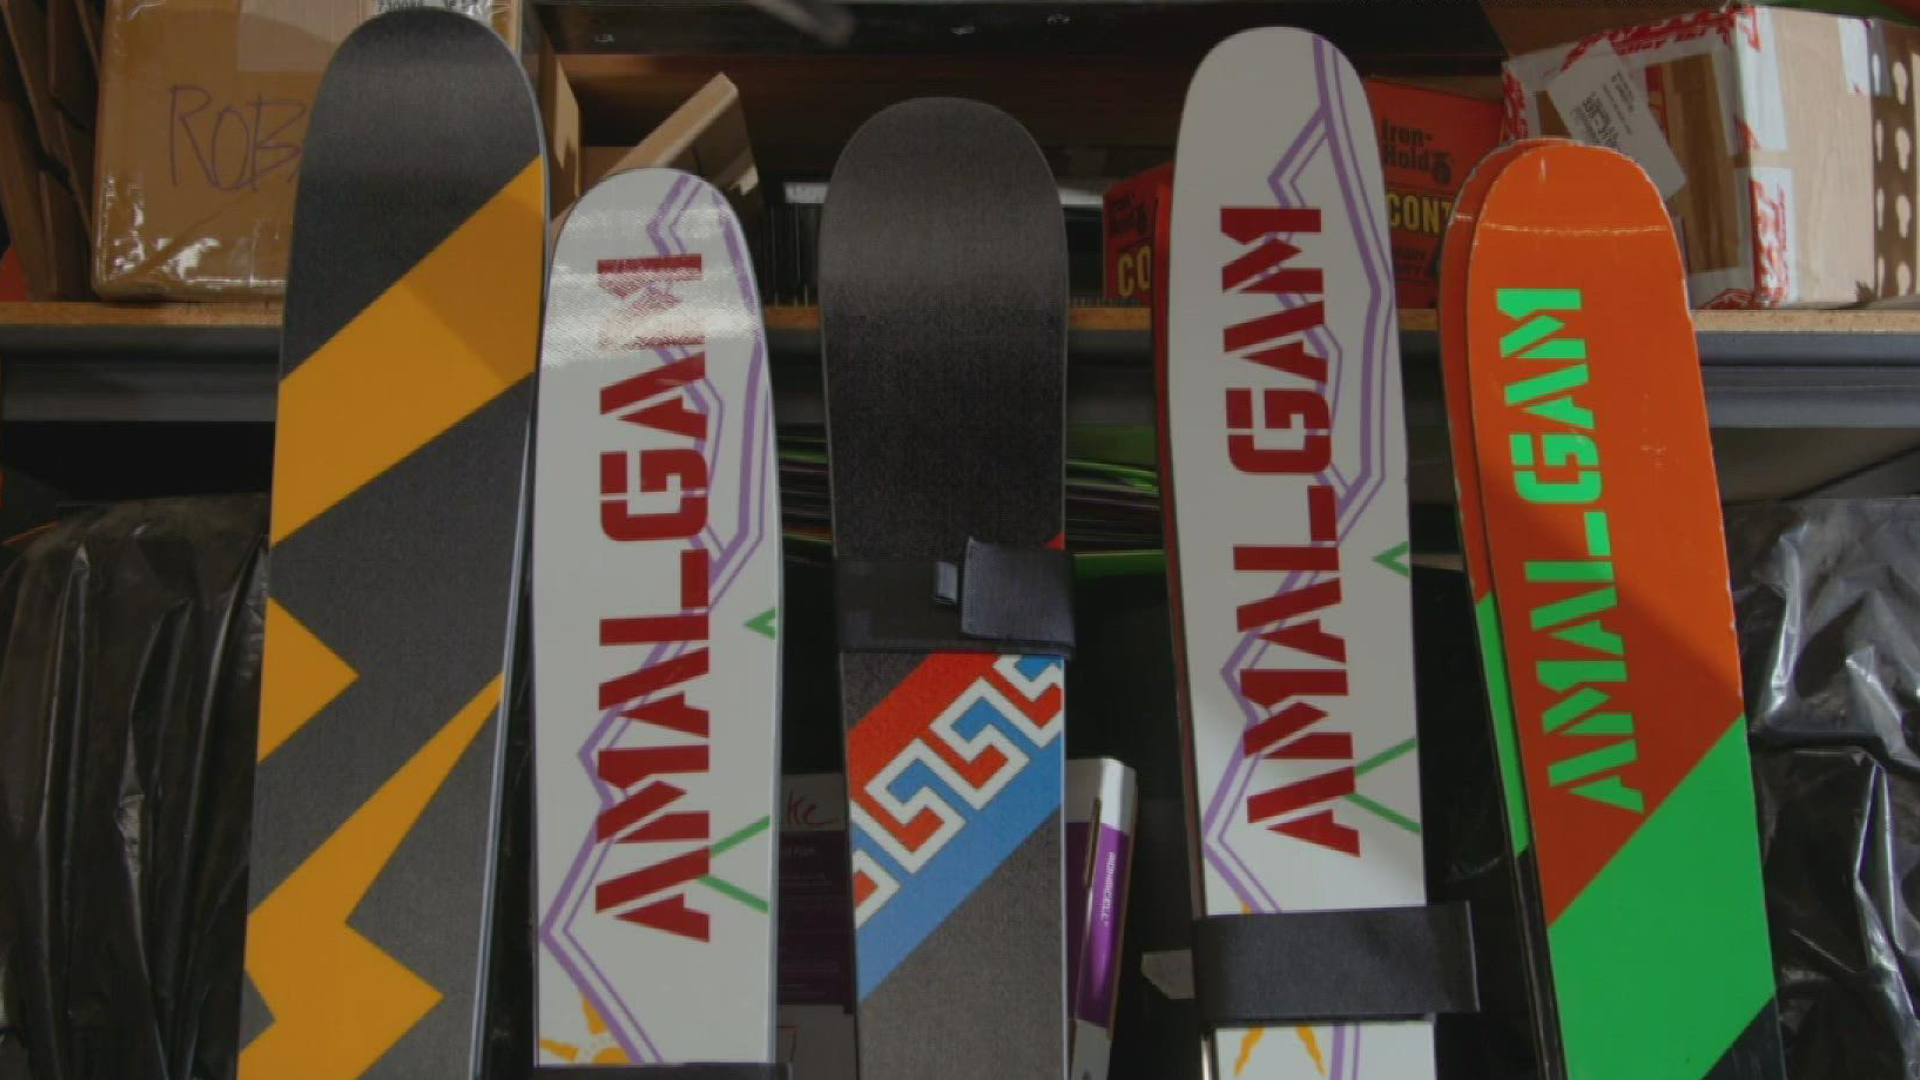 Phil and Amy Taisey have been making custom skis from the basement of their Freeport home for the last decade where they run Amalgam Skis.